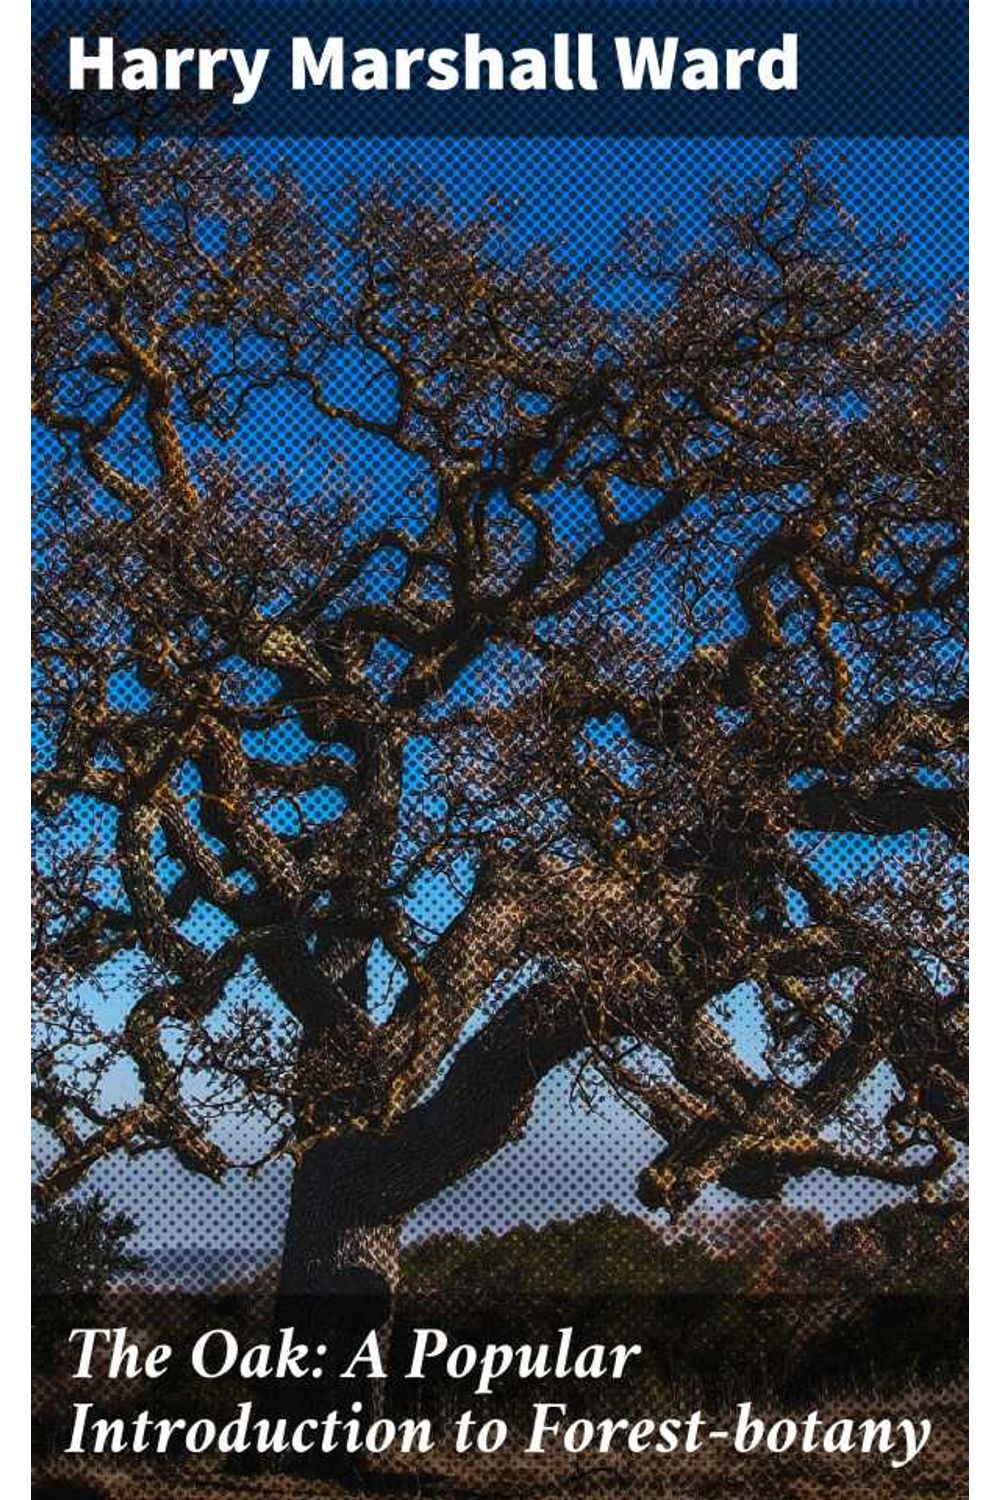 bw-the-oak-a-popular-introduction-to-forestbotany-good-press-4064066442682